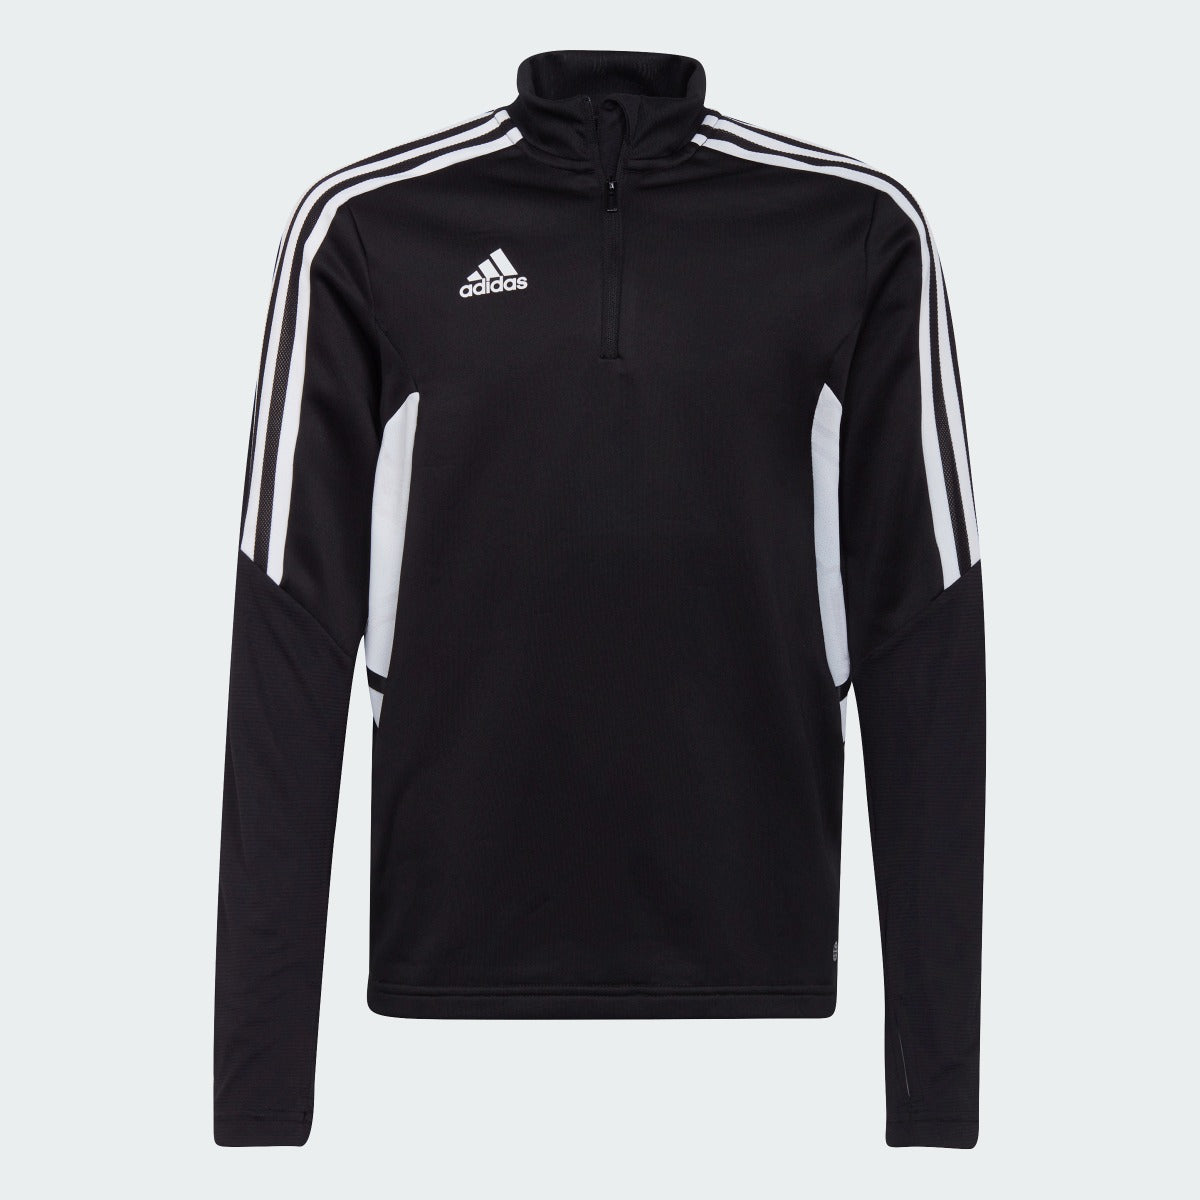 adidas Condivo 22 Youth Training Top Black-White (Front)